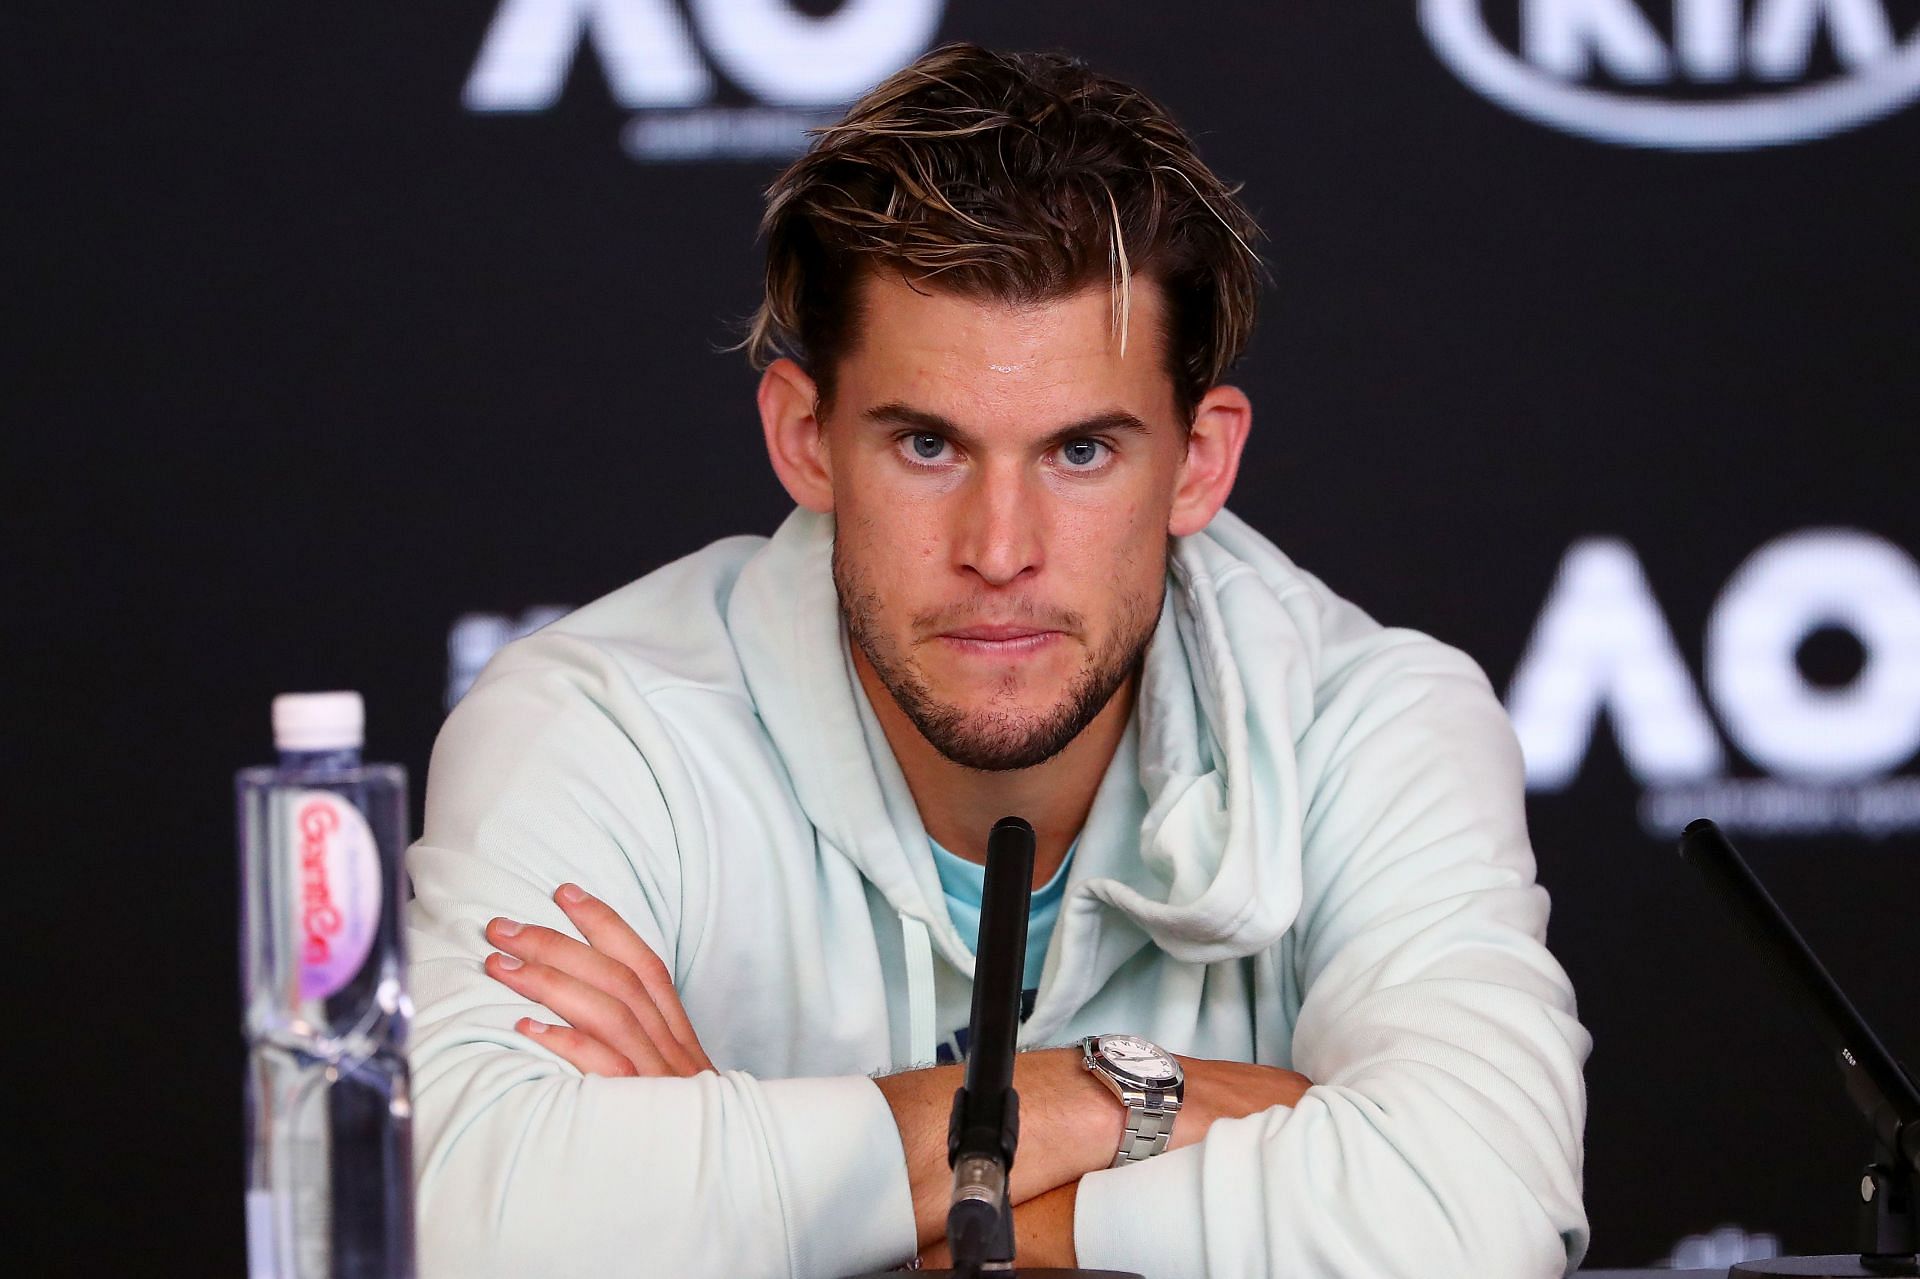 Dominic Thiem weighs in on the GOAT debate